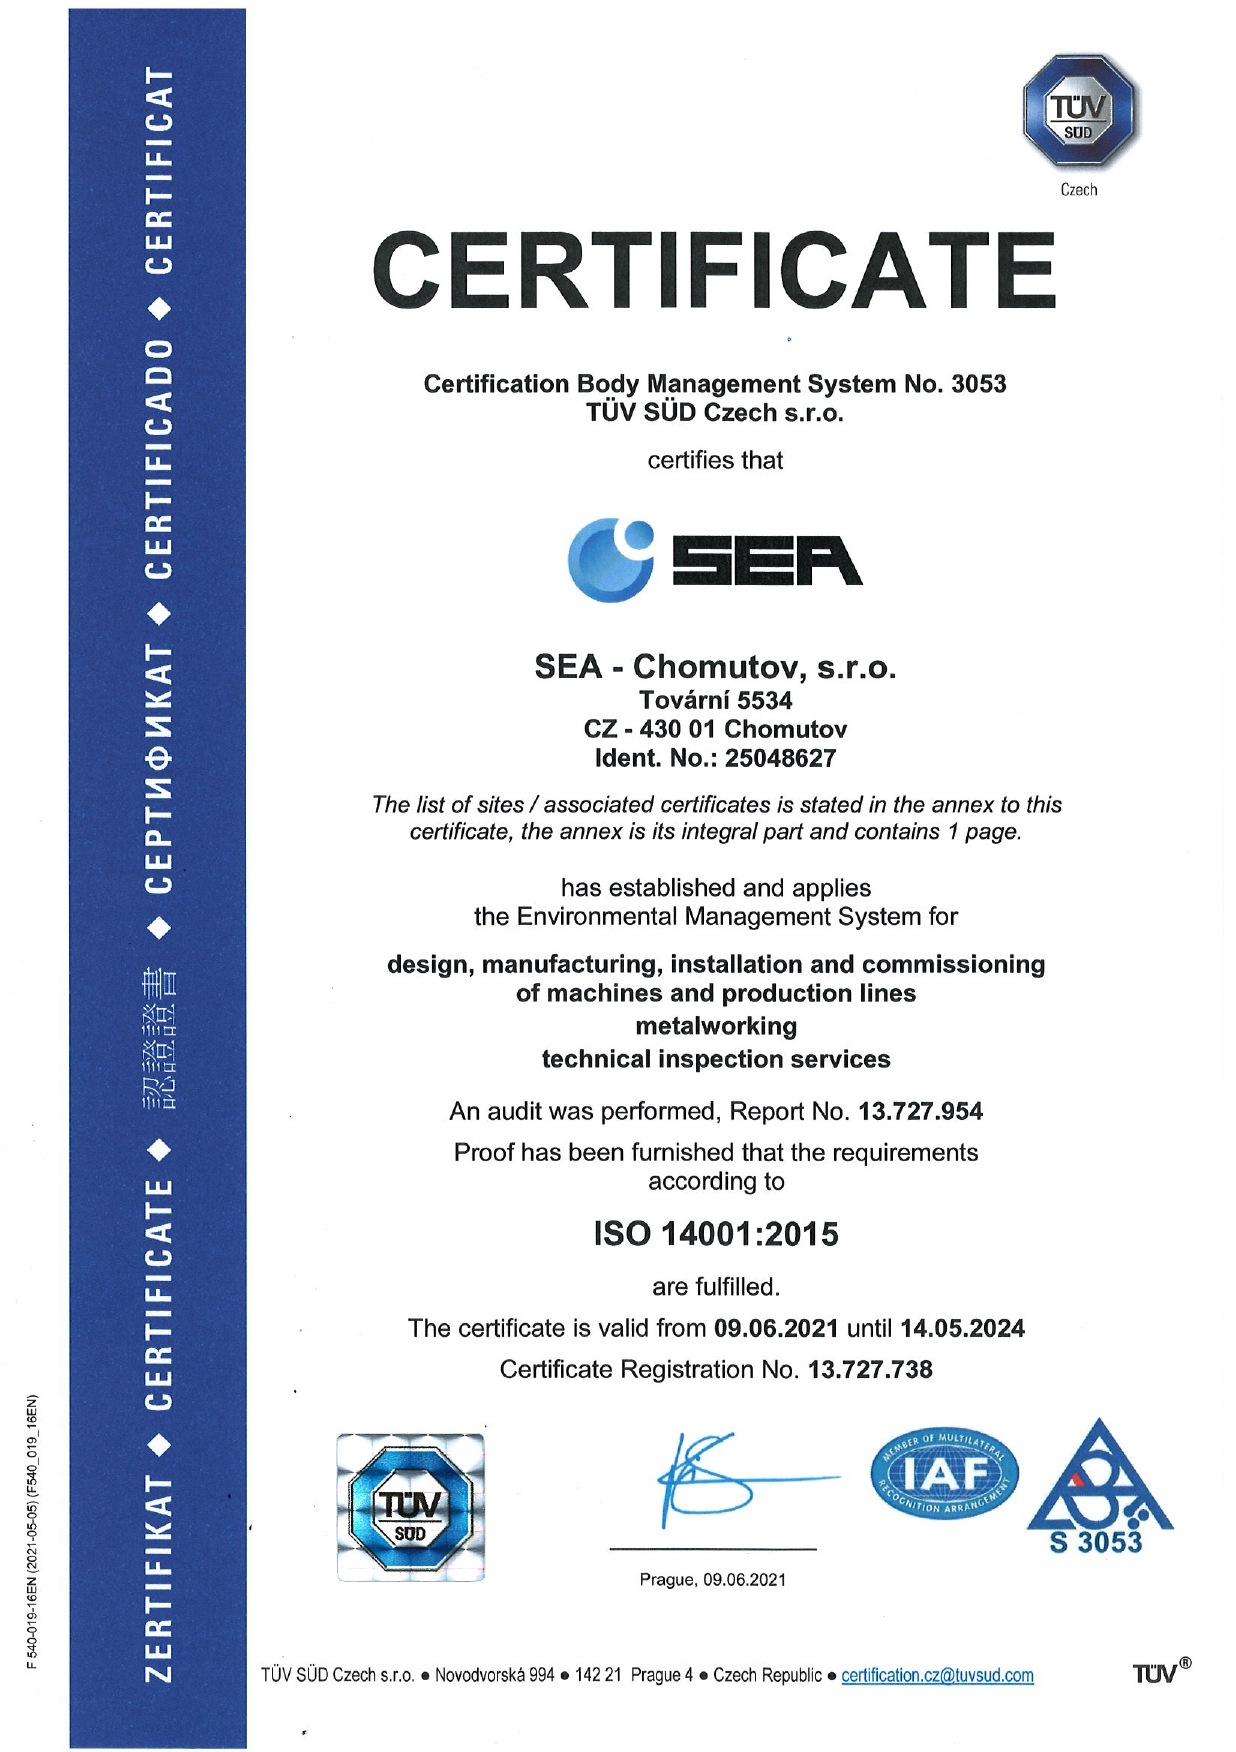 Certificate of Environmental Management System According to ISO 14001:2015